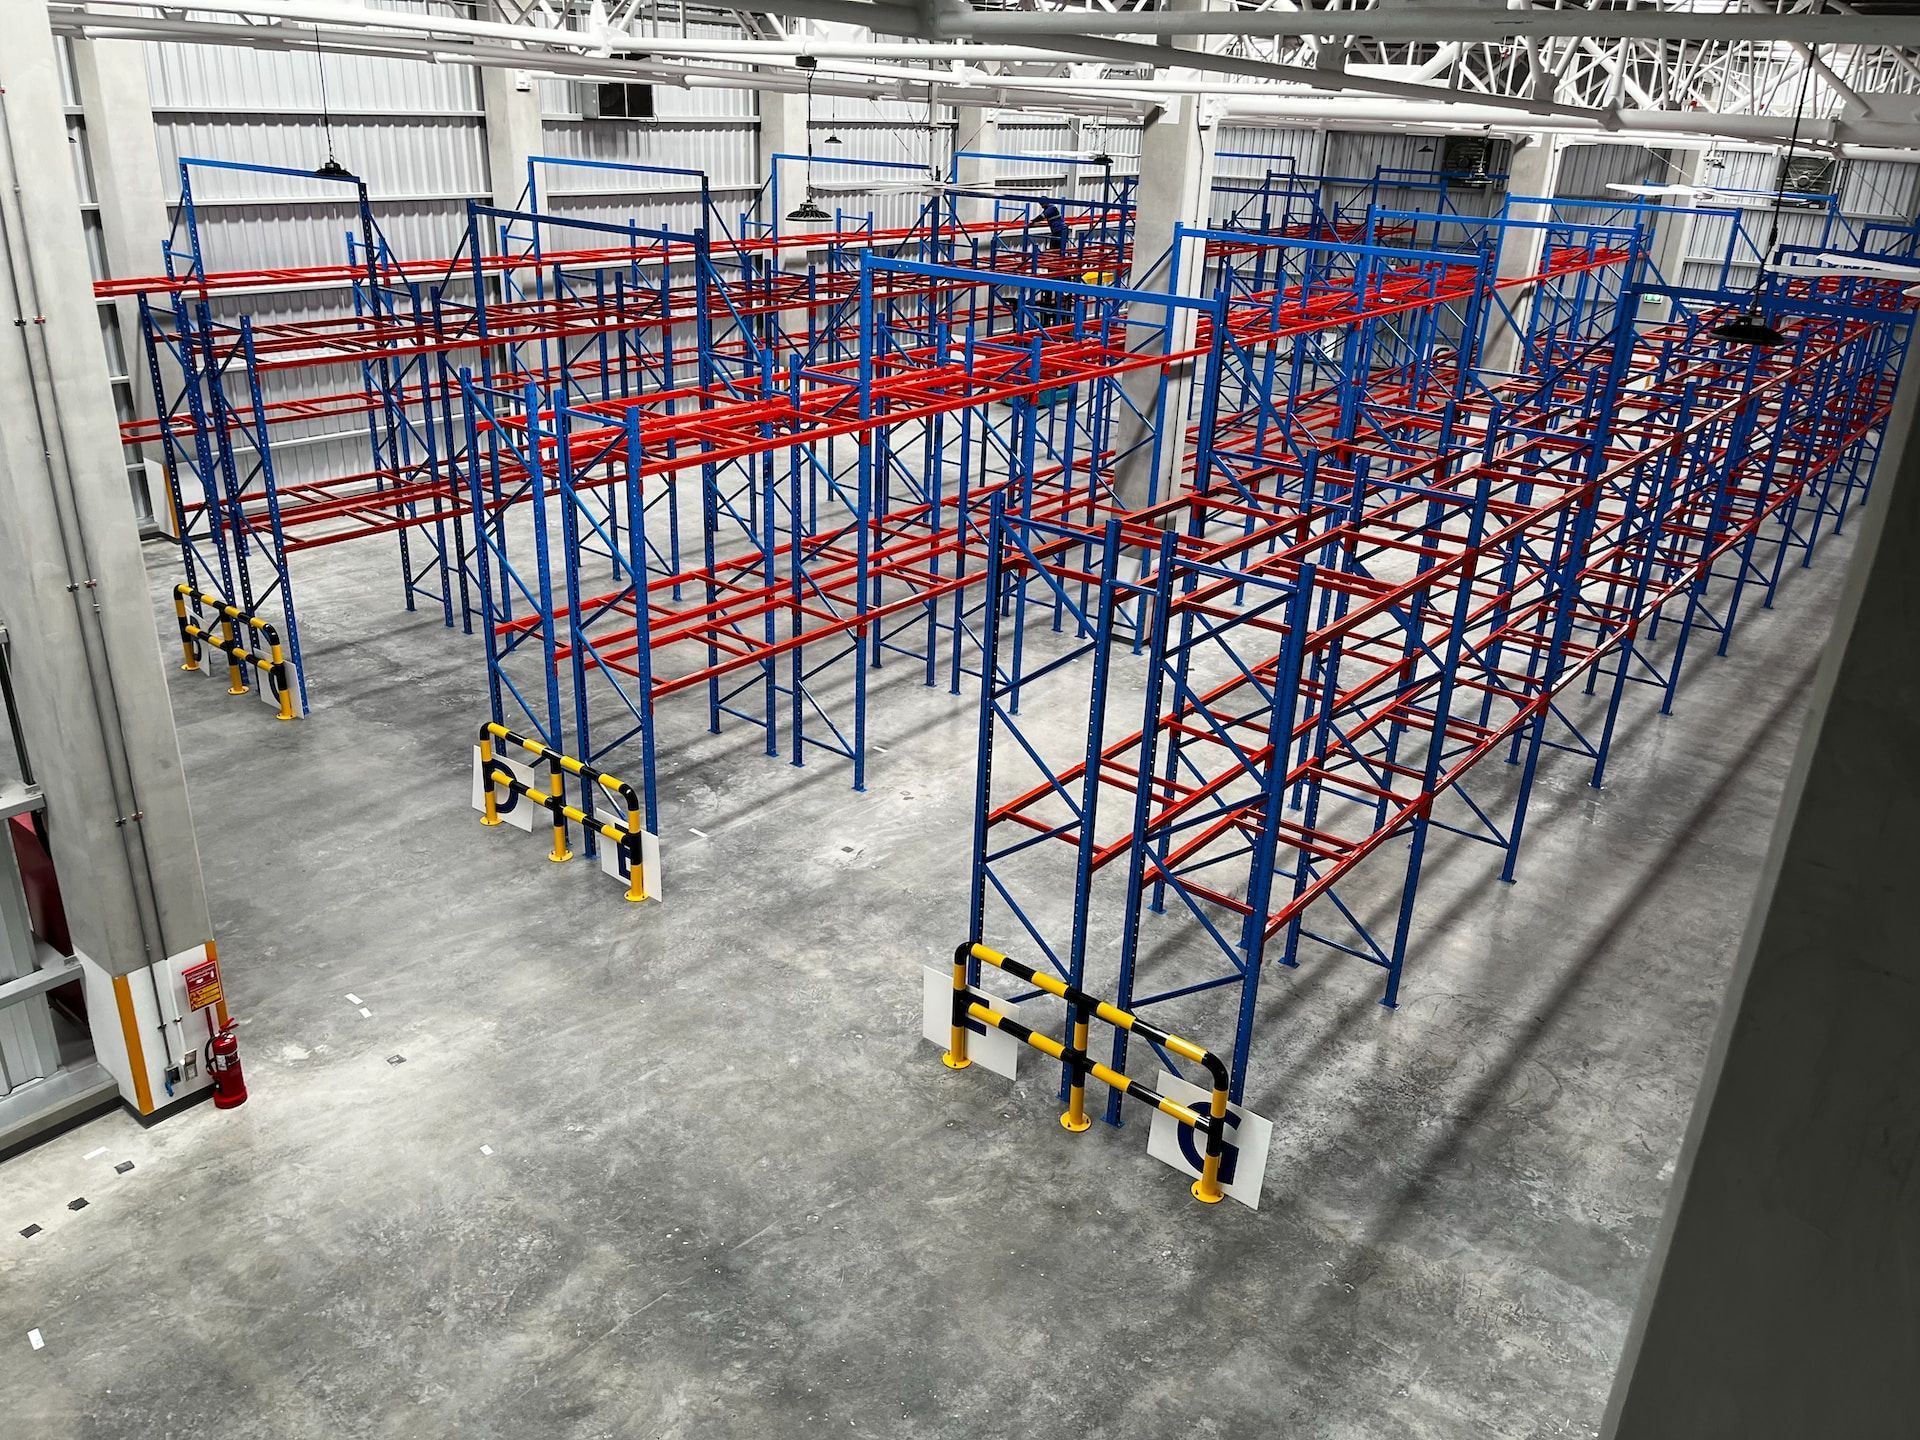 Overhead view of red and blue metal pallet racks